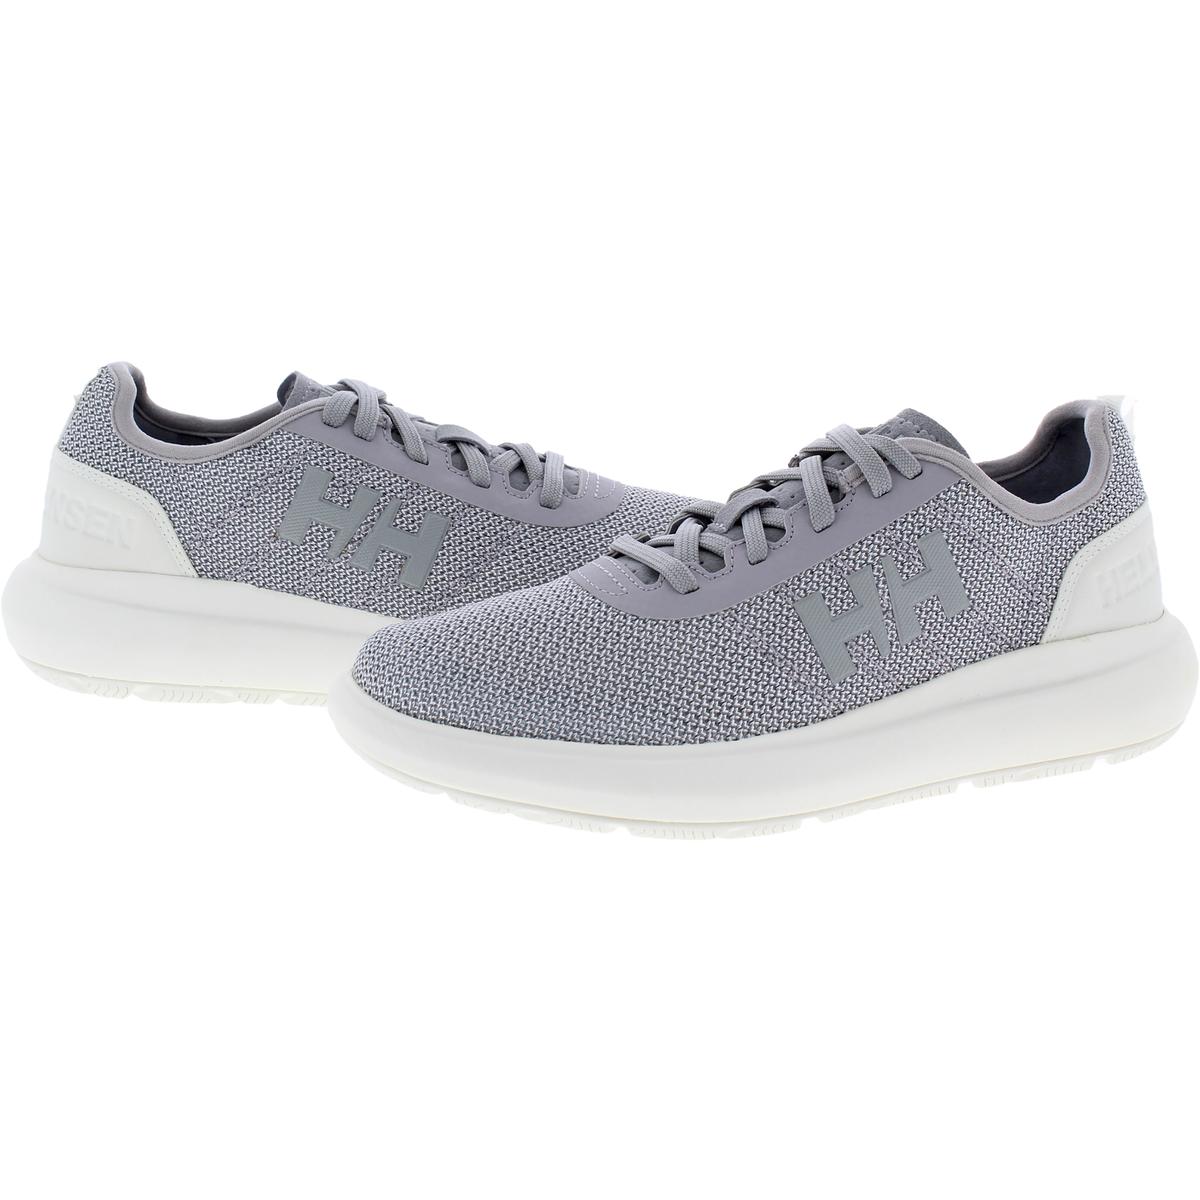 Helly Hansen Womens Spindrift Fitness Performance Sneakers Shoes BHFO ...